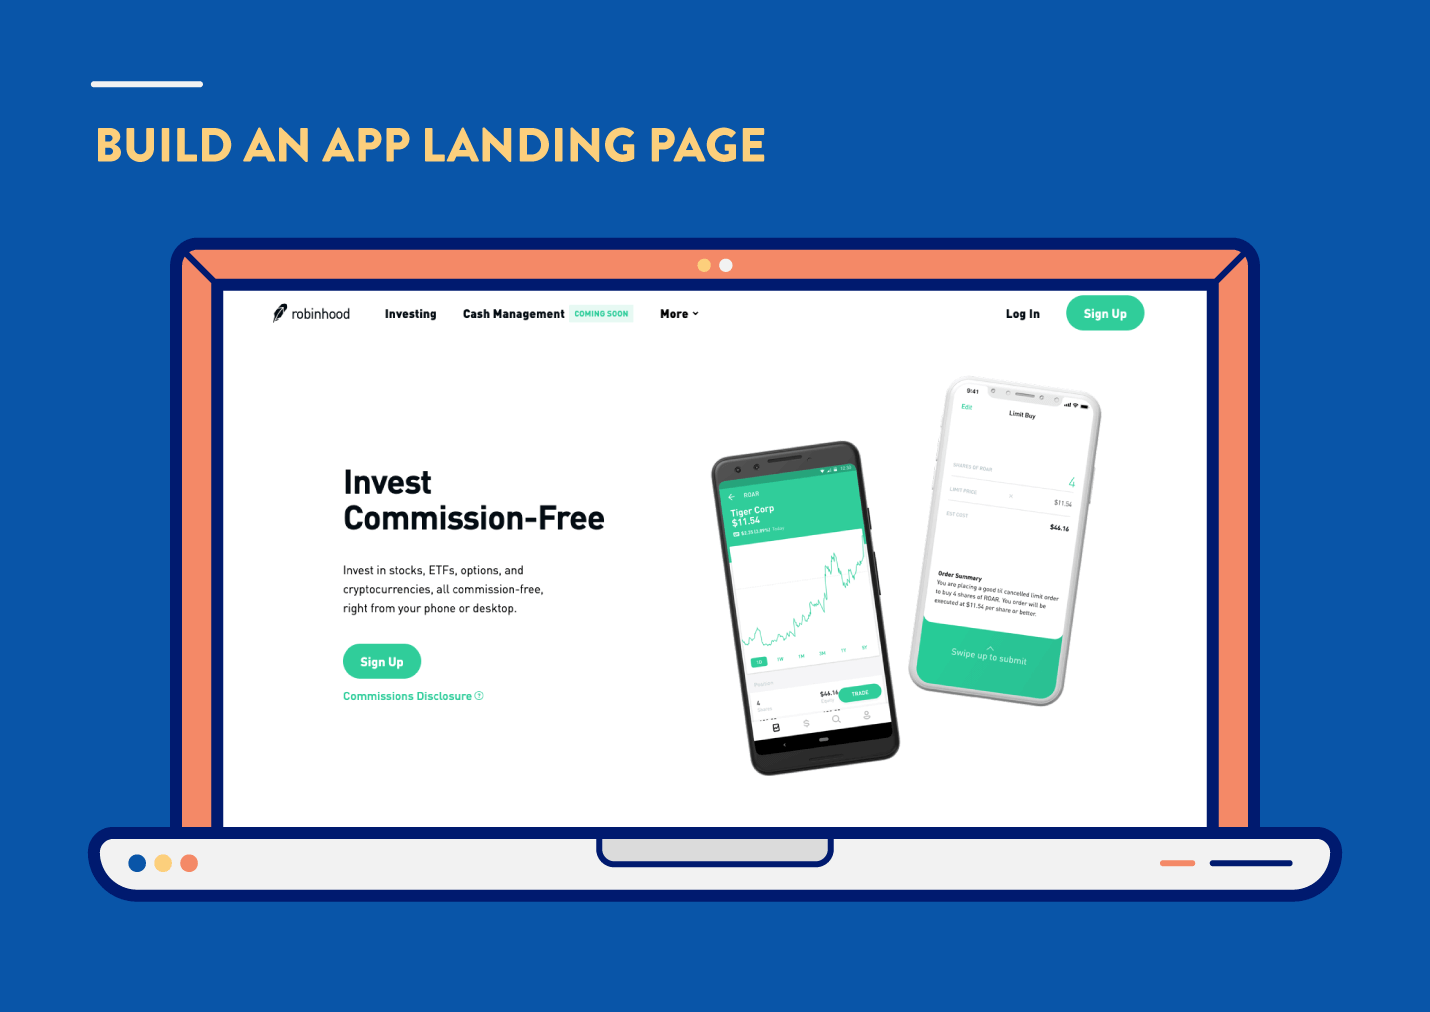 app marketing strategies to build an app landing page with robinhood example